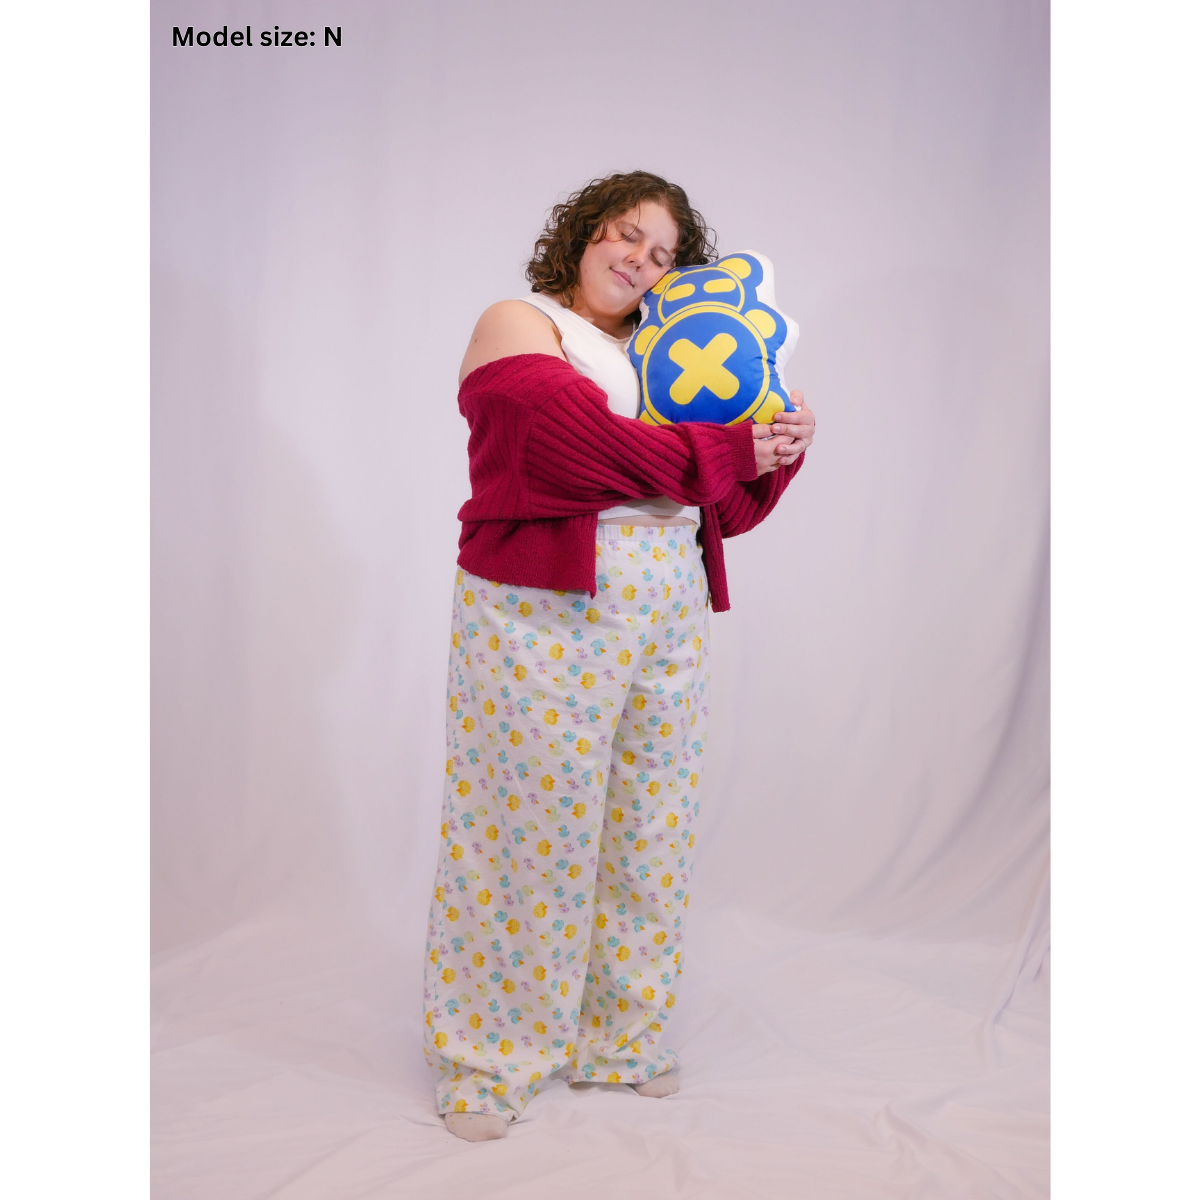 A photo of a woman wearing rubber ducky white pajama pants (size N), a white sleeveless crop top (size H), and a red jacket holding our Timmy pillow plush.